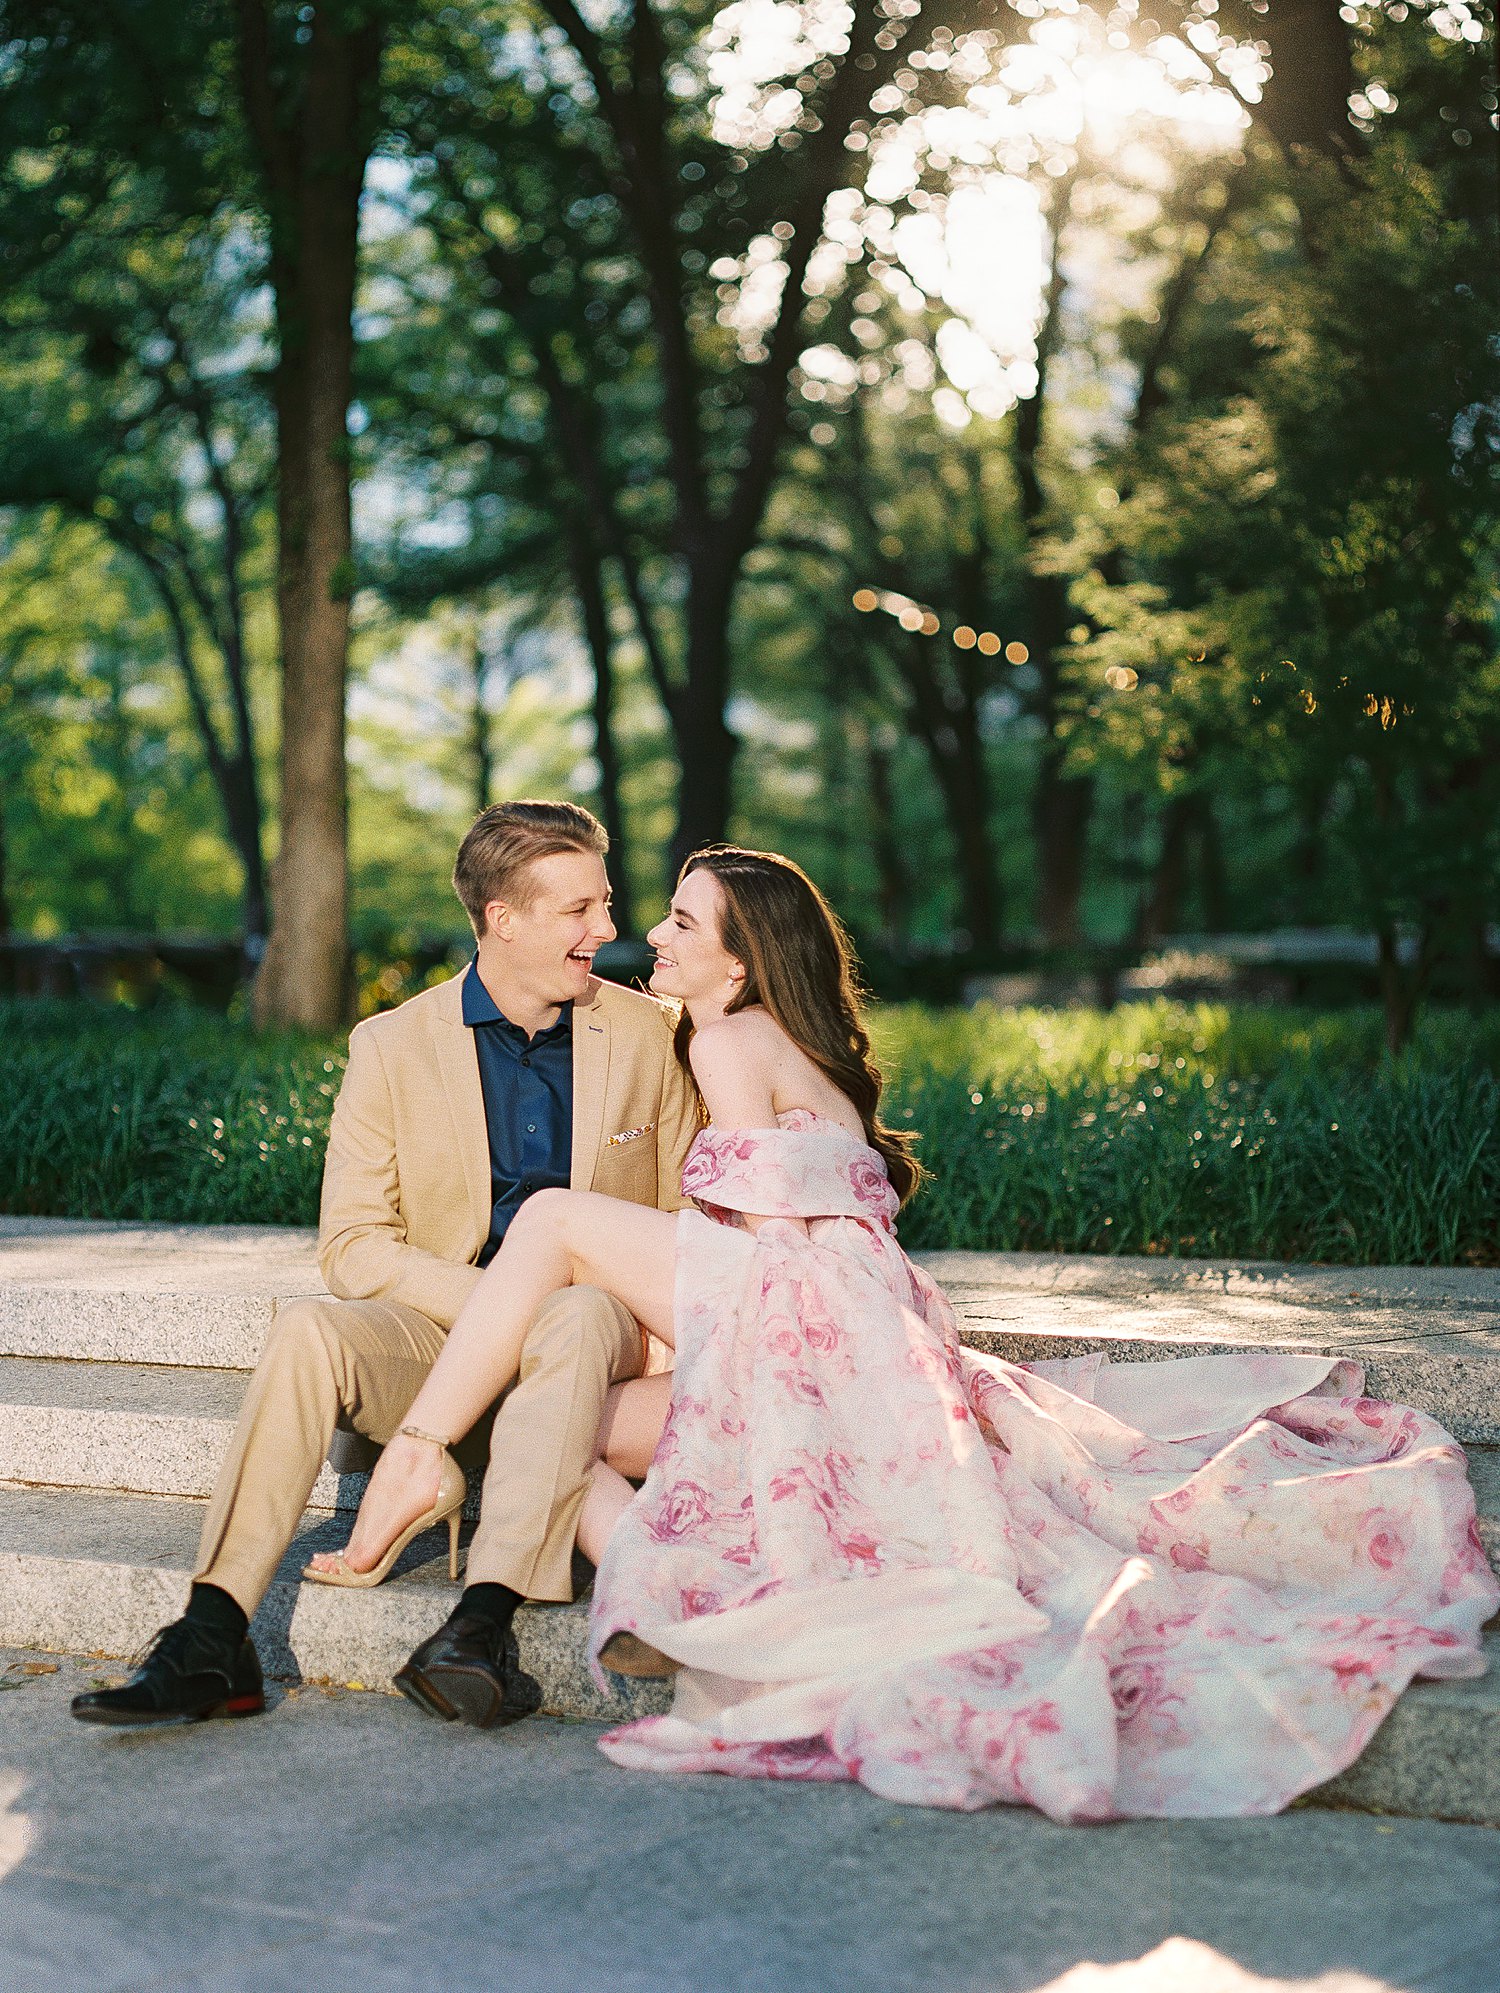 laughing woman in Pink floral gown sitting with man in tan suite and blue shirt dallas garden engagement